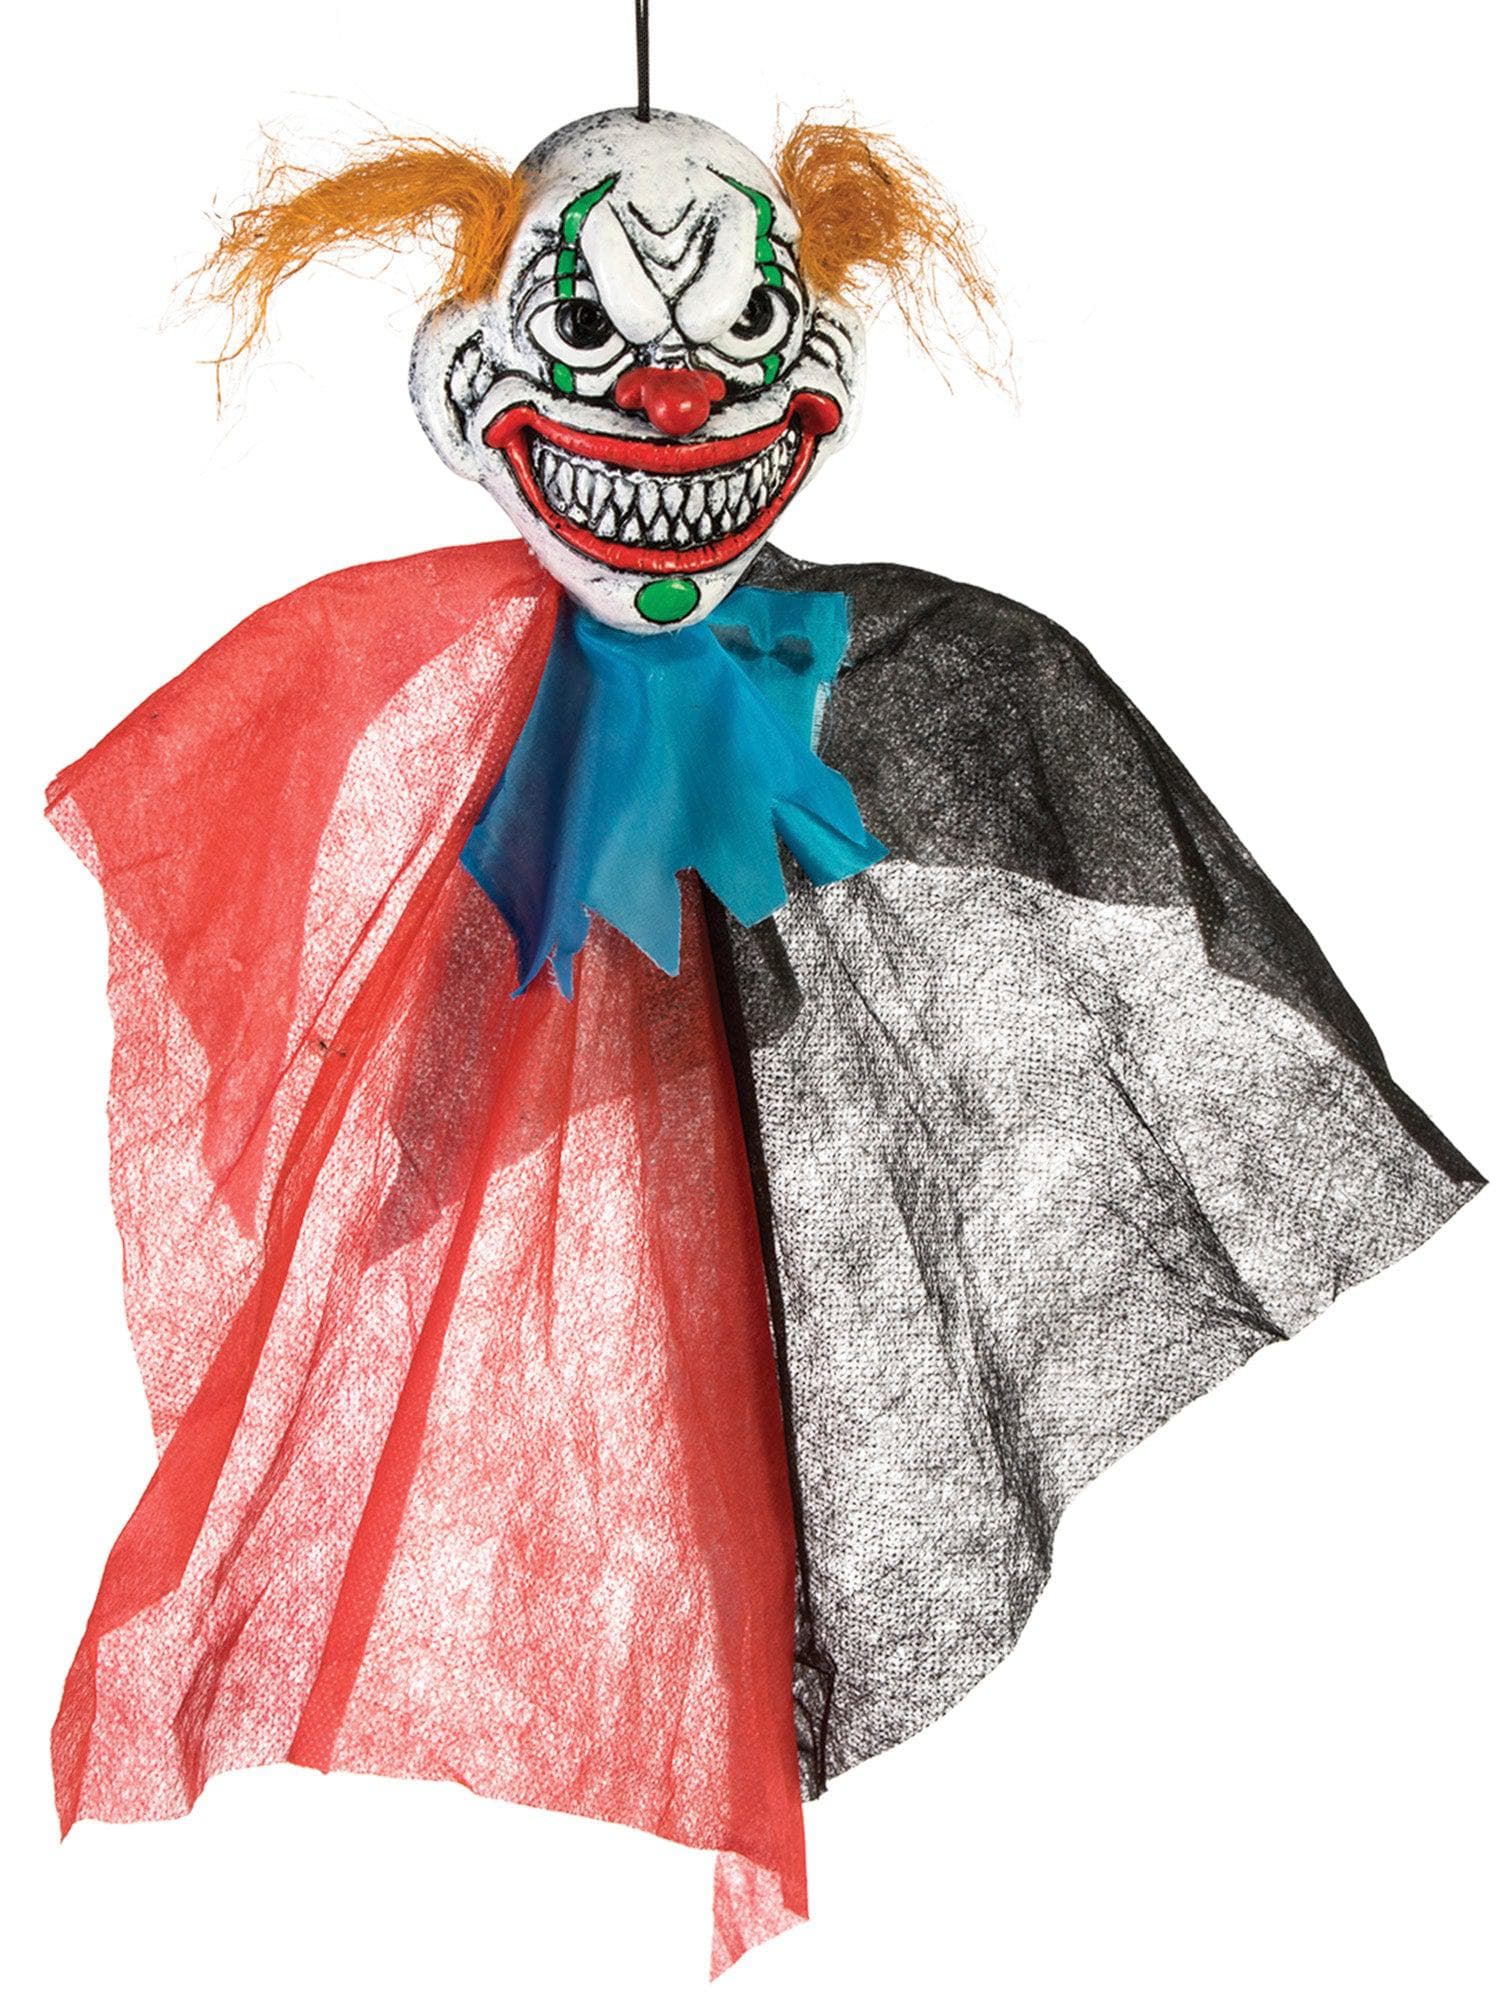 12-inch Scary Clown Hanging Decoration - costumes.com